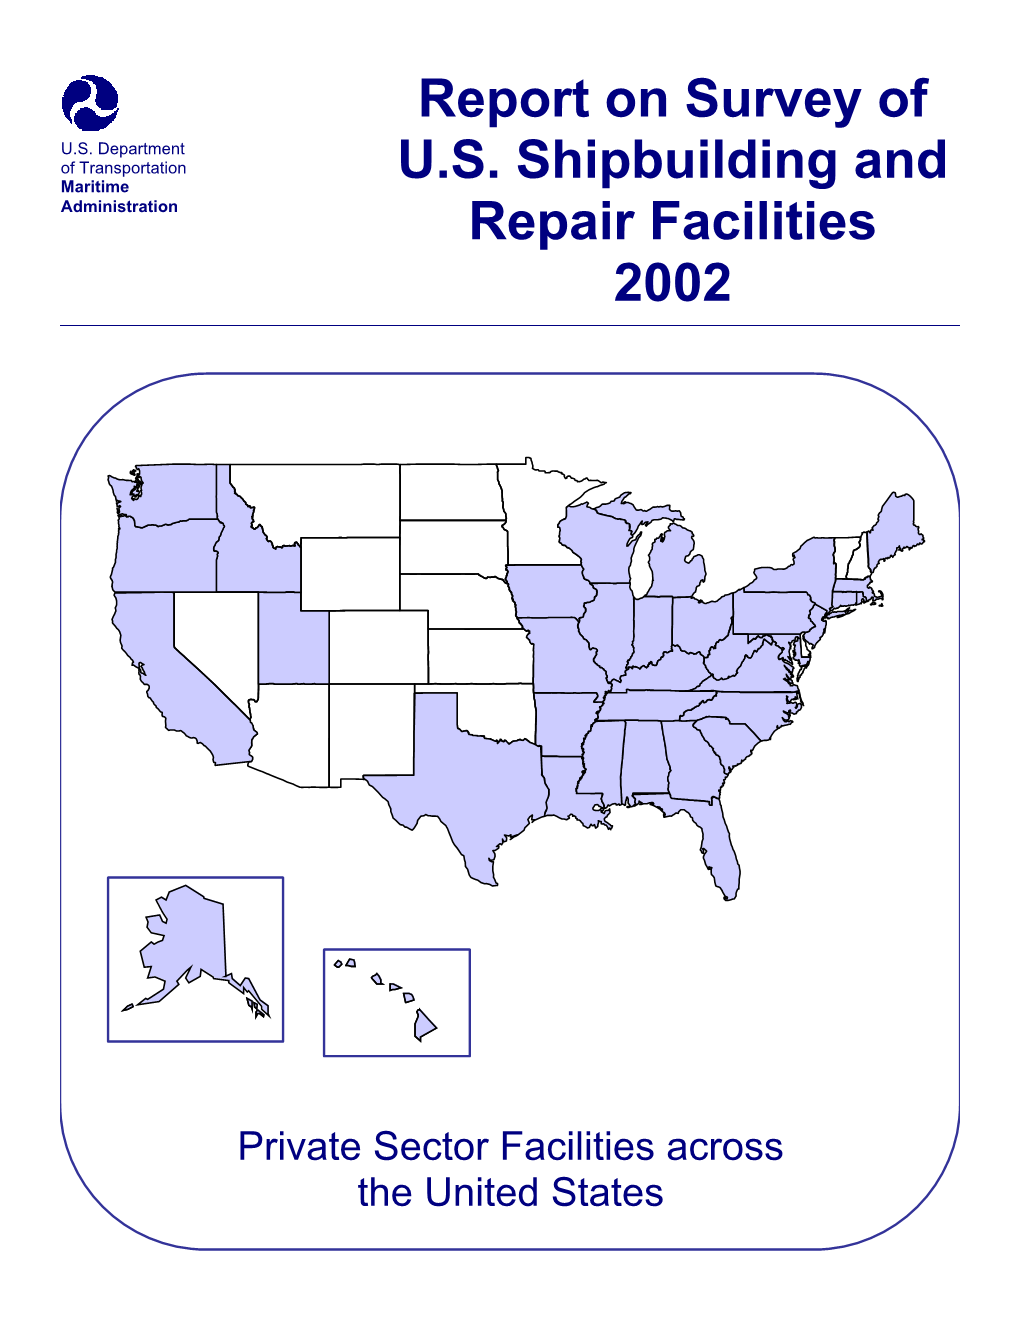 Report on Survey of US Shipbuilding and Repair Facilities 2002